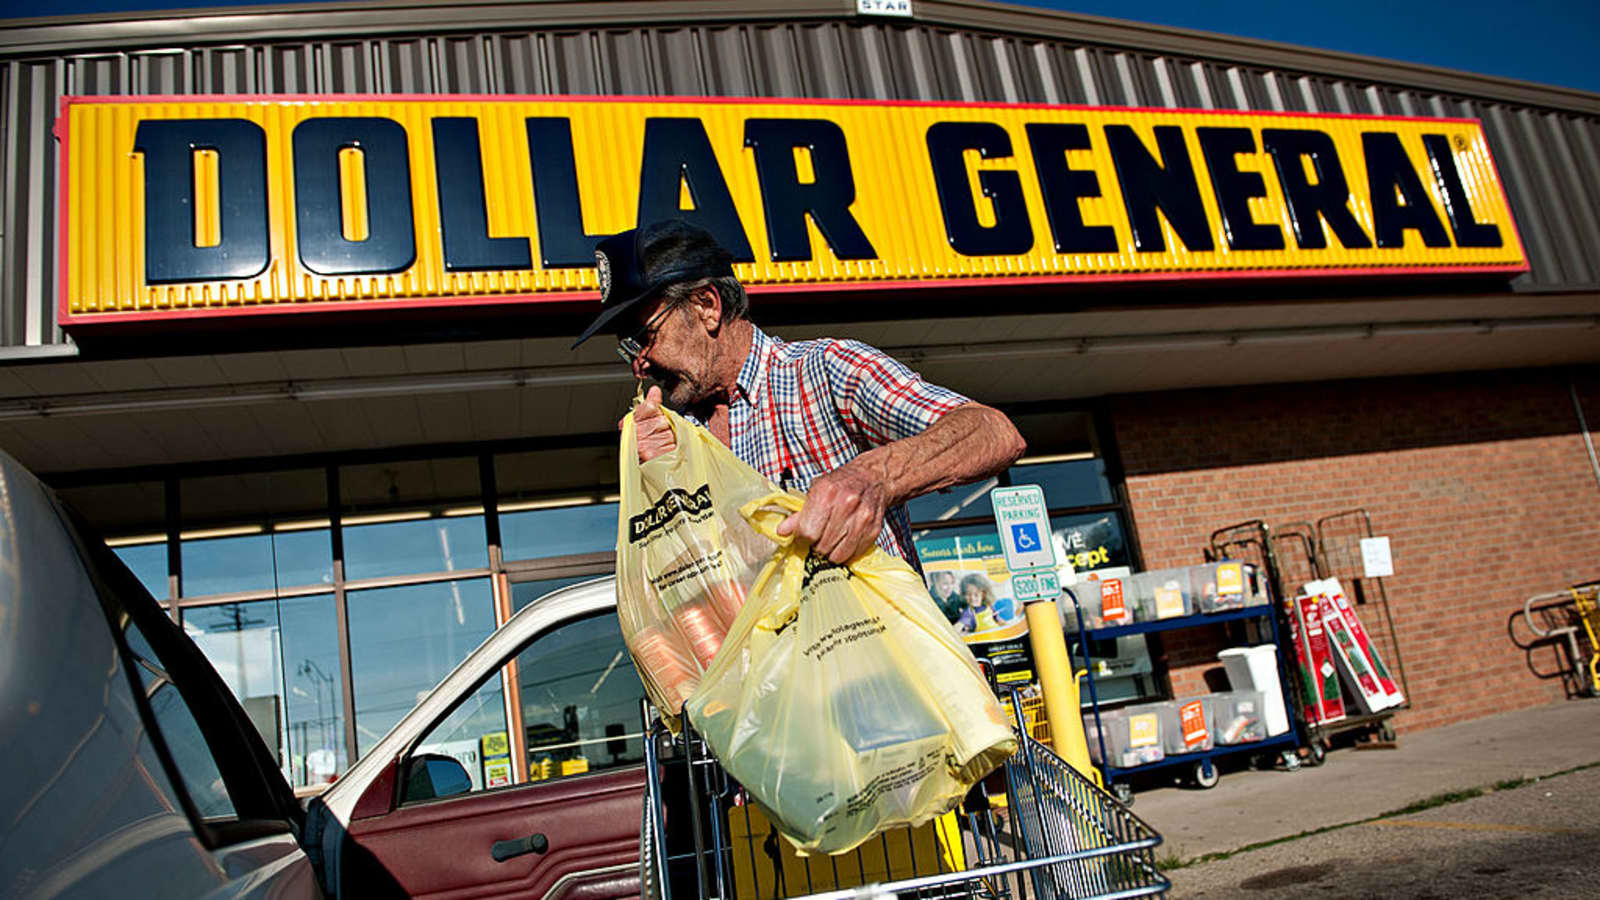 Dollar General Takes a Fresh Approach: Selling Produce in 5,000 Stores and Its Impact on Local Communities